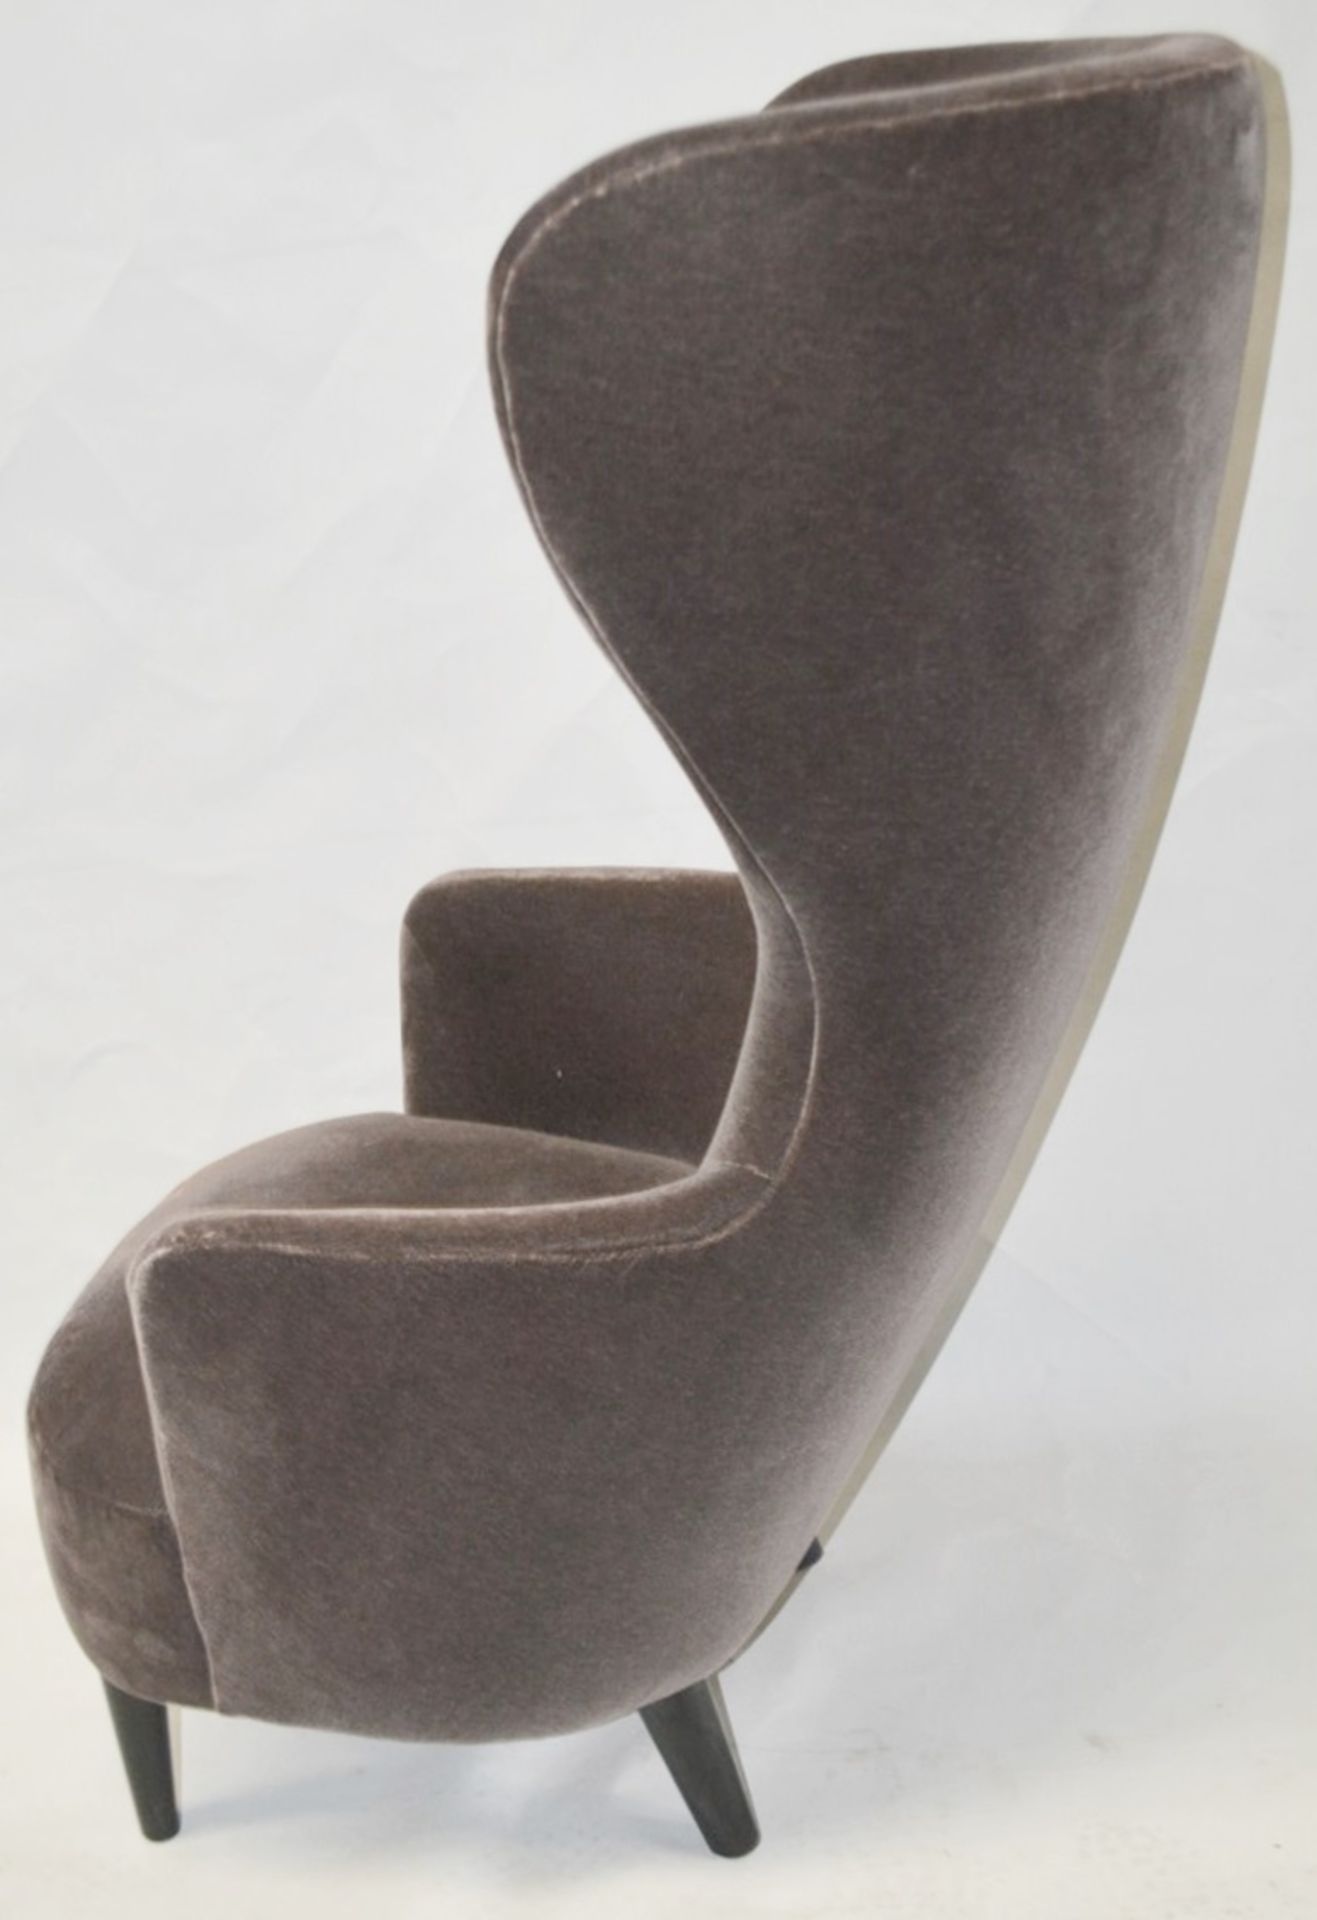 1 x TOM DIXON Designer Handcrafted Wing-Back Chair In A Light Brown Velvet With Black Solid Oak Legs - Image 8 of 9